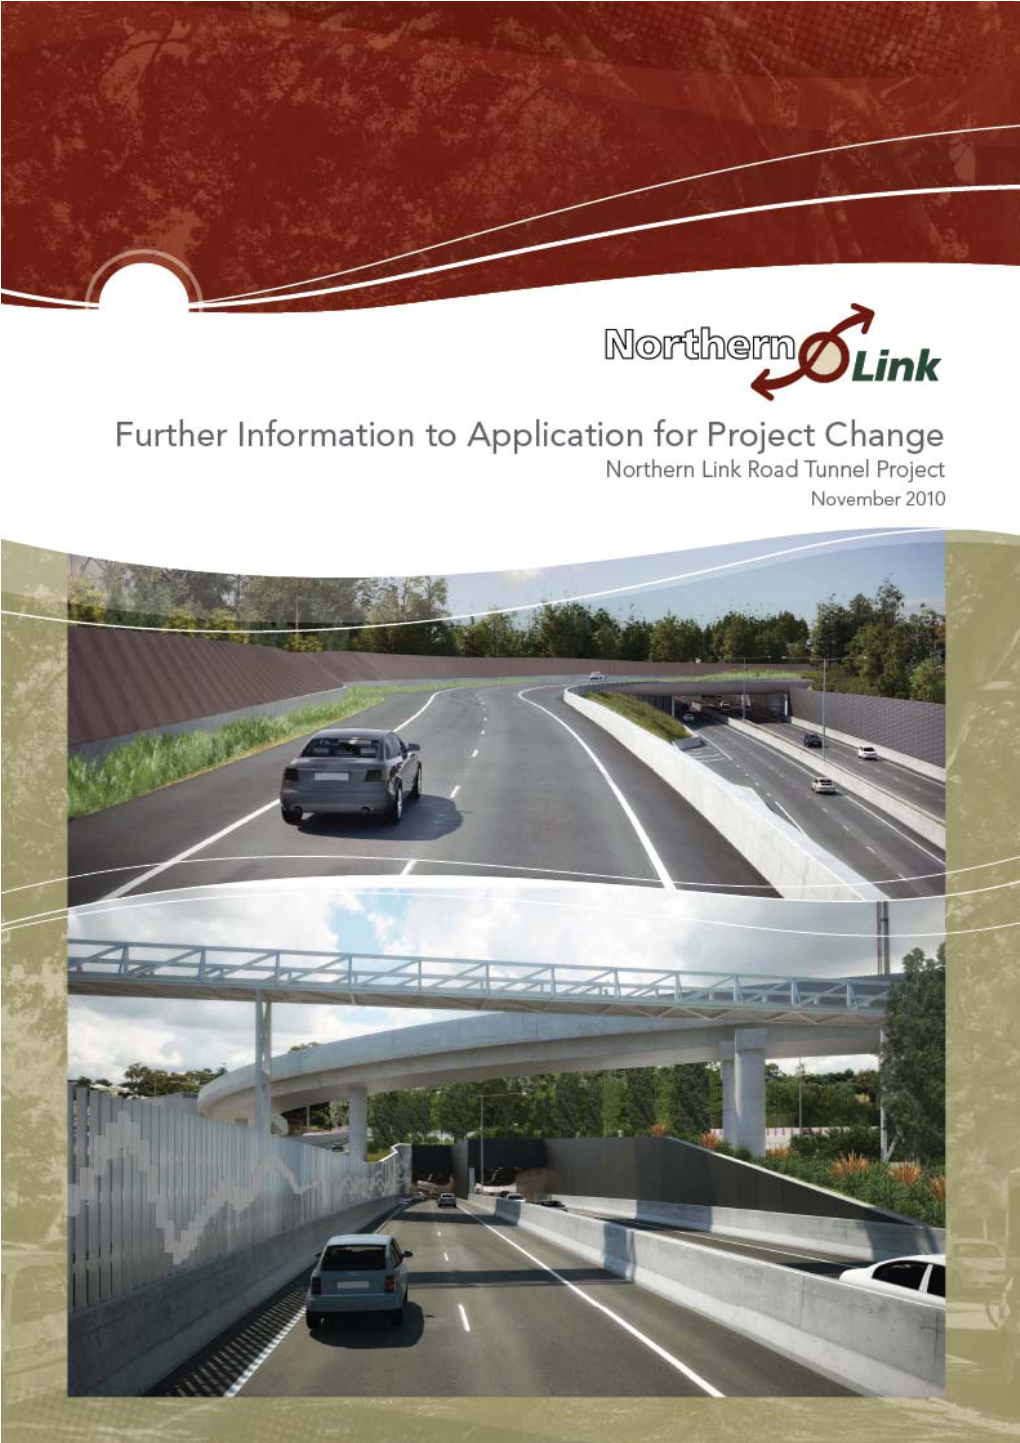 Northern Link Road Tunnel Project